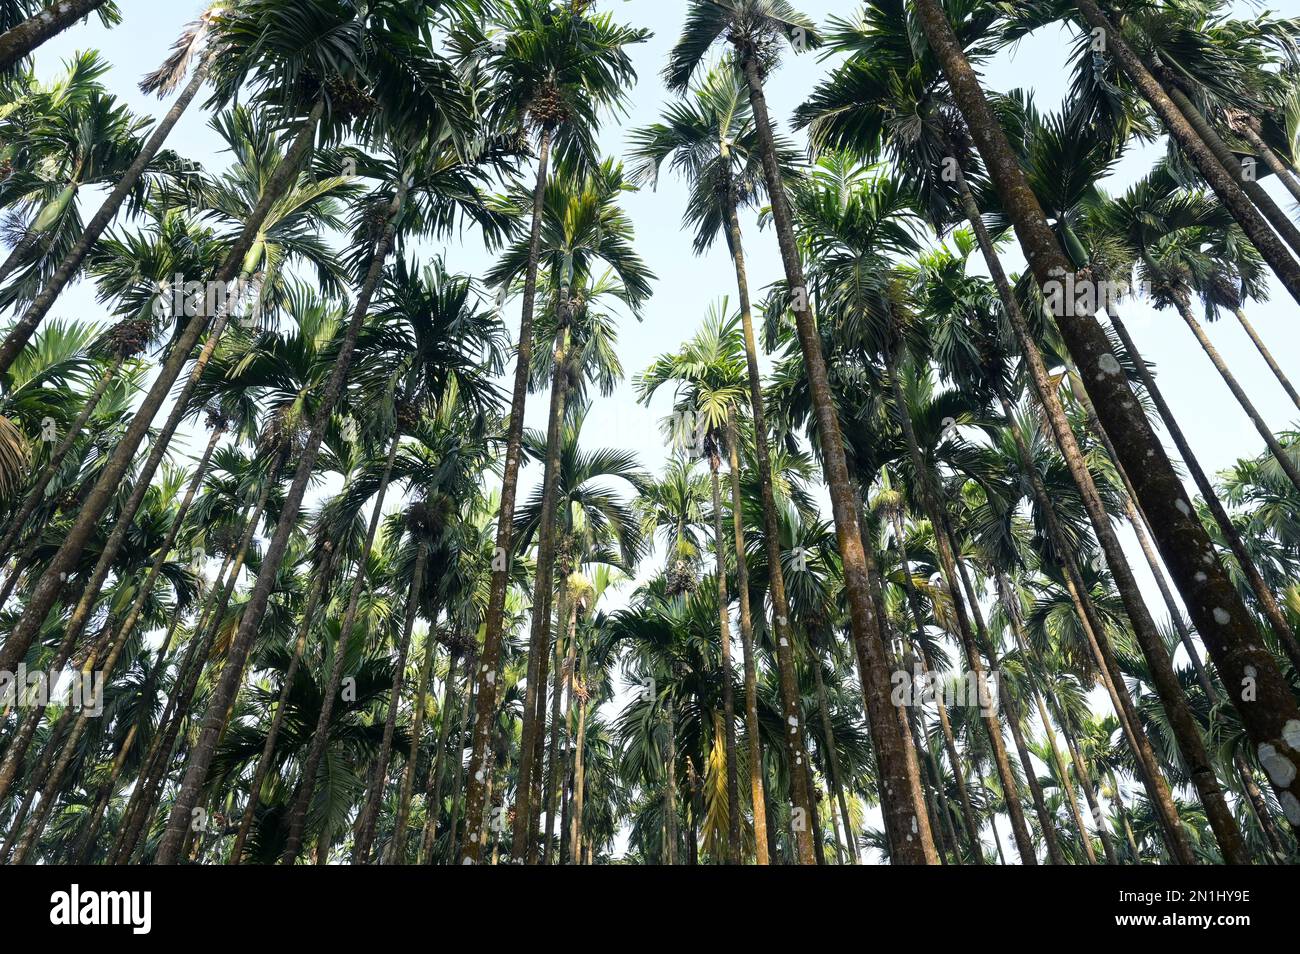 INDIA, Karnataka, Mudbidri, Betel nut or areca nut plantation, betelnut is the fruit of the Areca palm tree, it is used as a chewing drug with betel pepper and other ingredient, areca contains alkaloids, consumption of areca has many harmful effects on health and is carcinogenic to humans Stock Photo